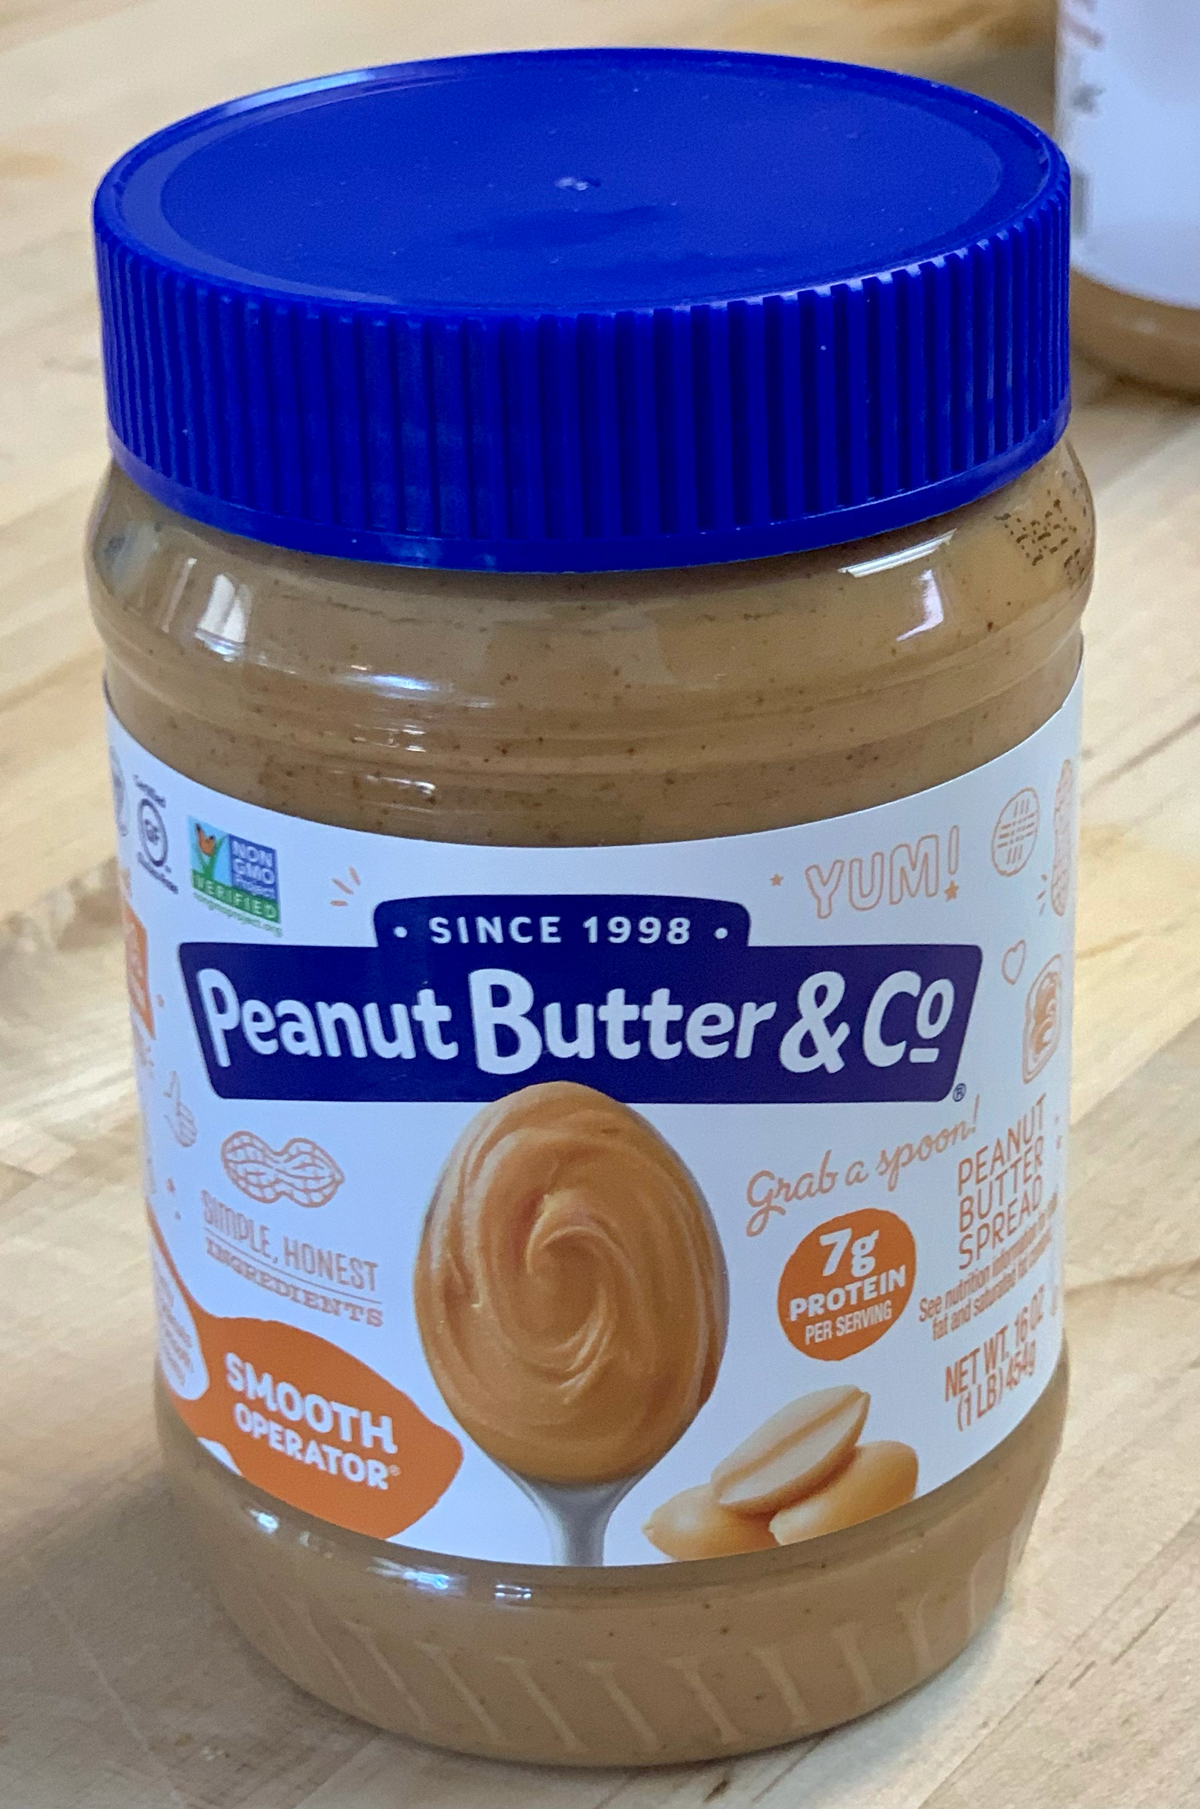 Peanut Butter & Co Smooth Operator